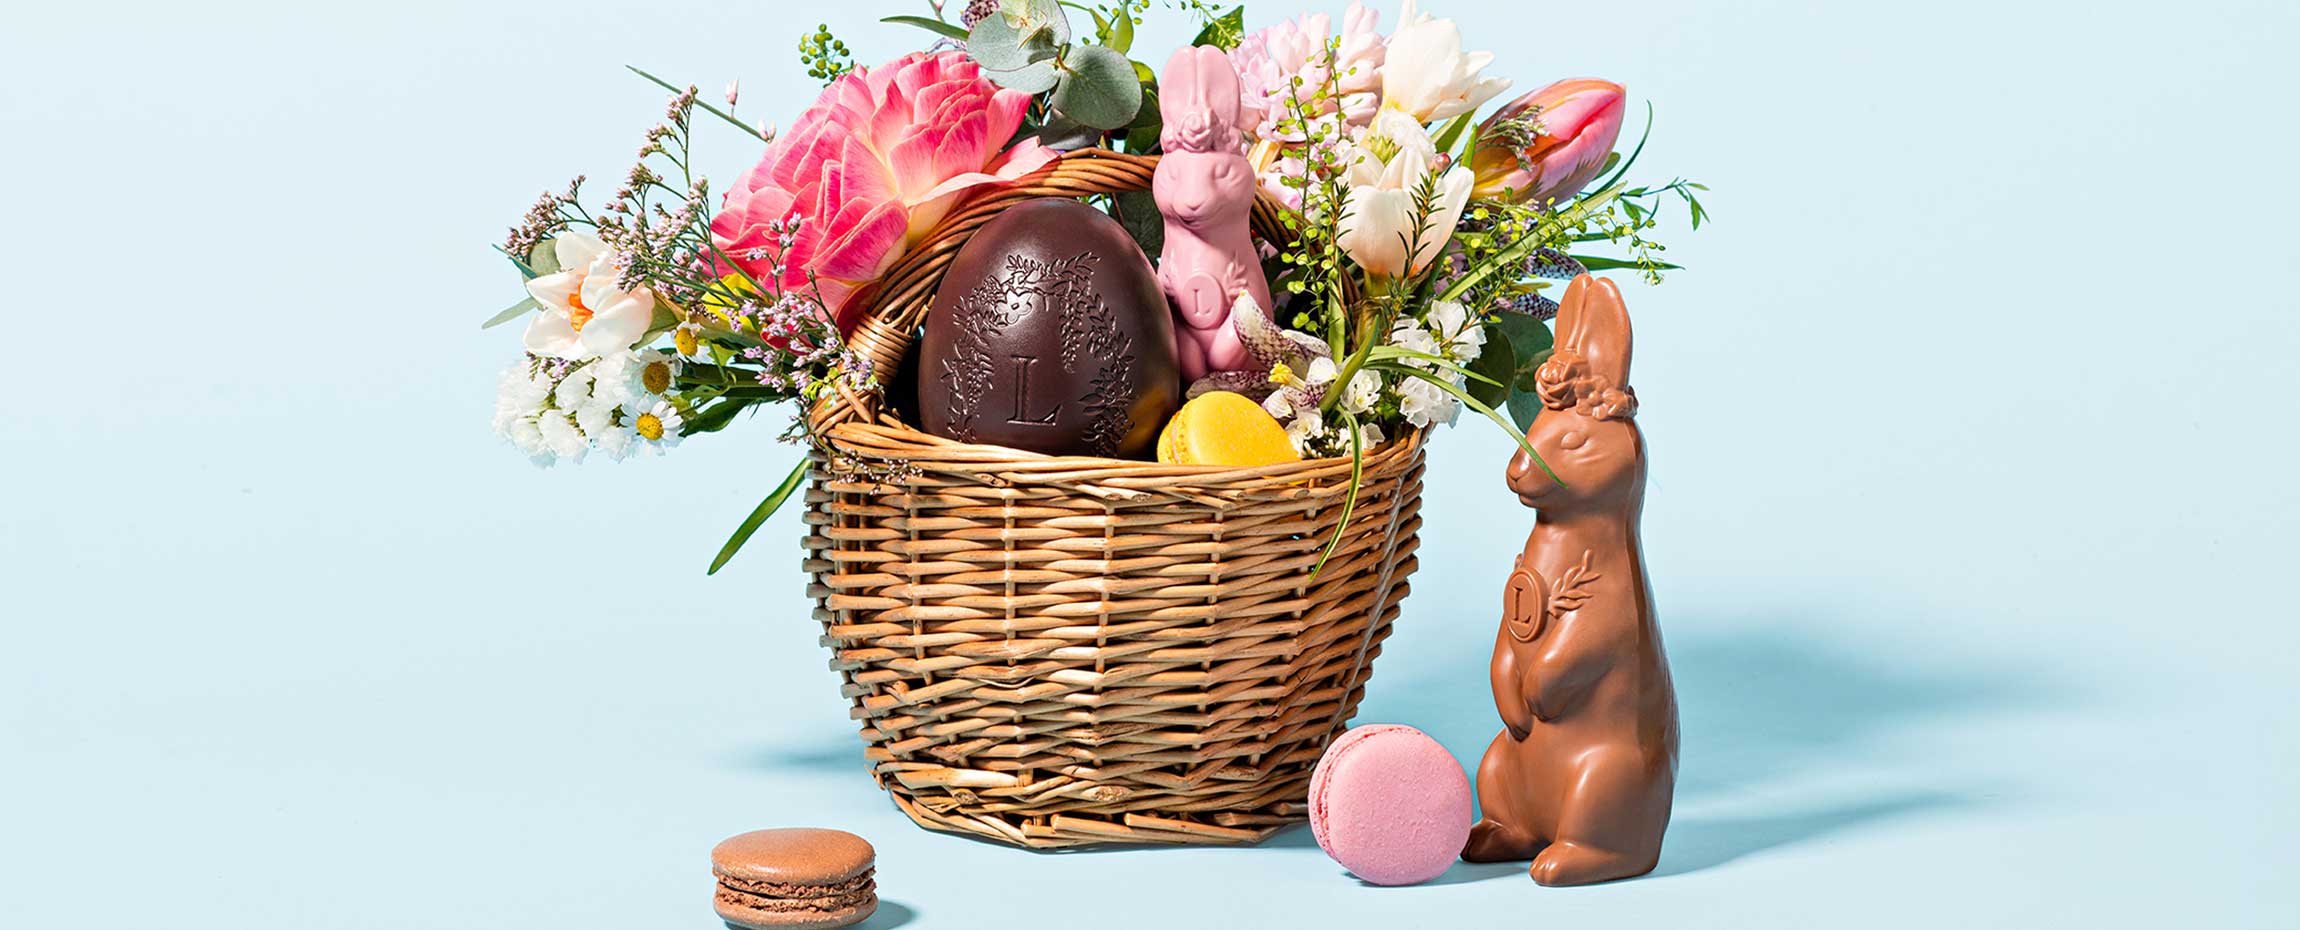 Our Easter chocolates are online!